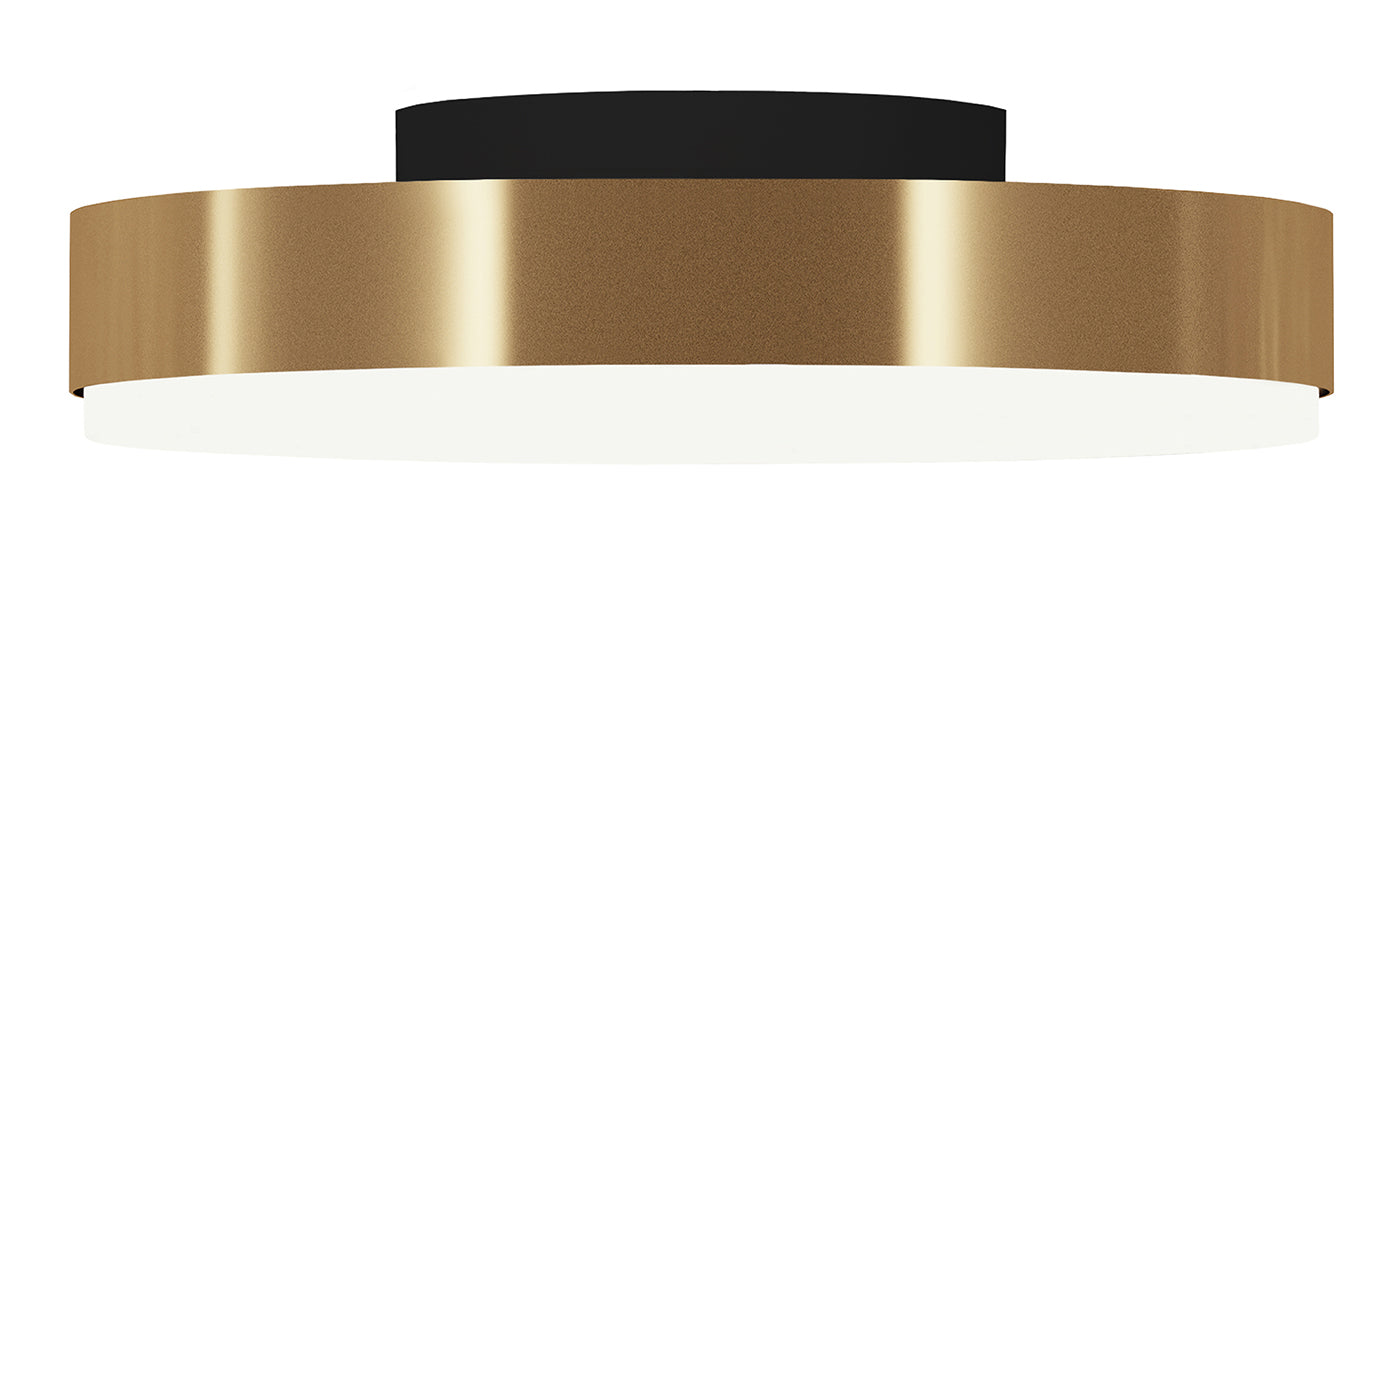 Discus Brass & Black Ceiling Lamp by MKV Design - Main view